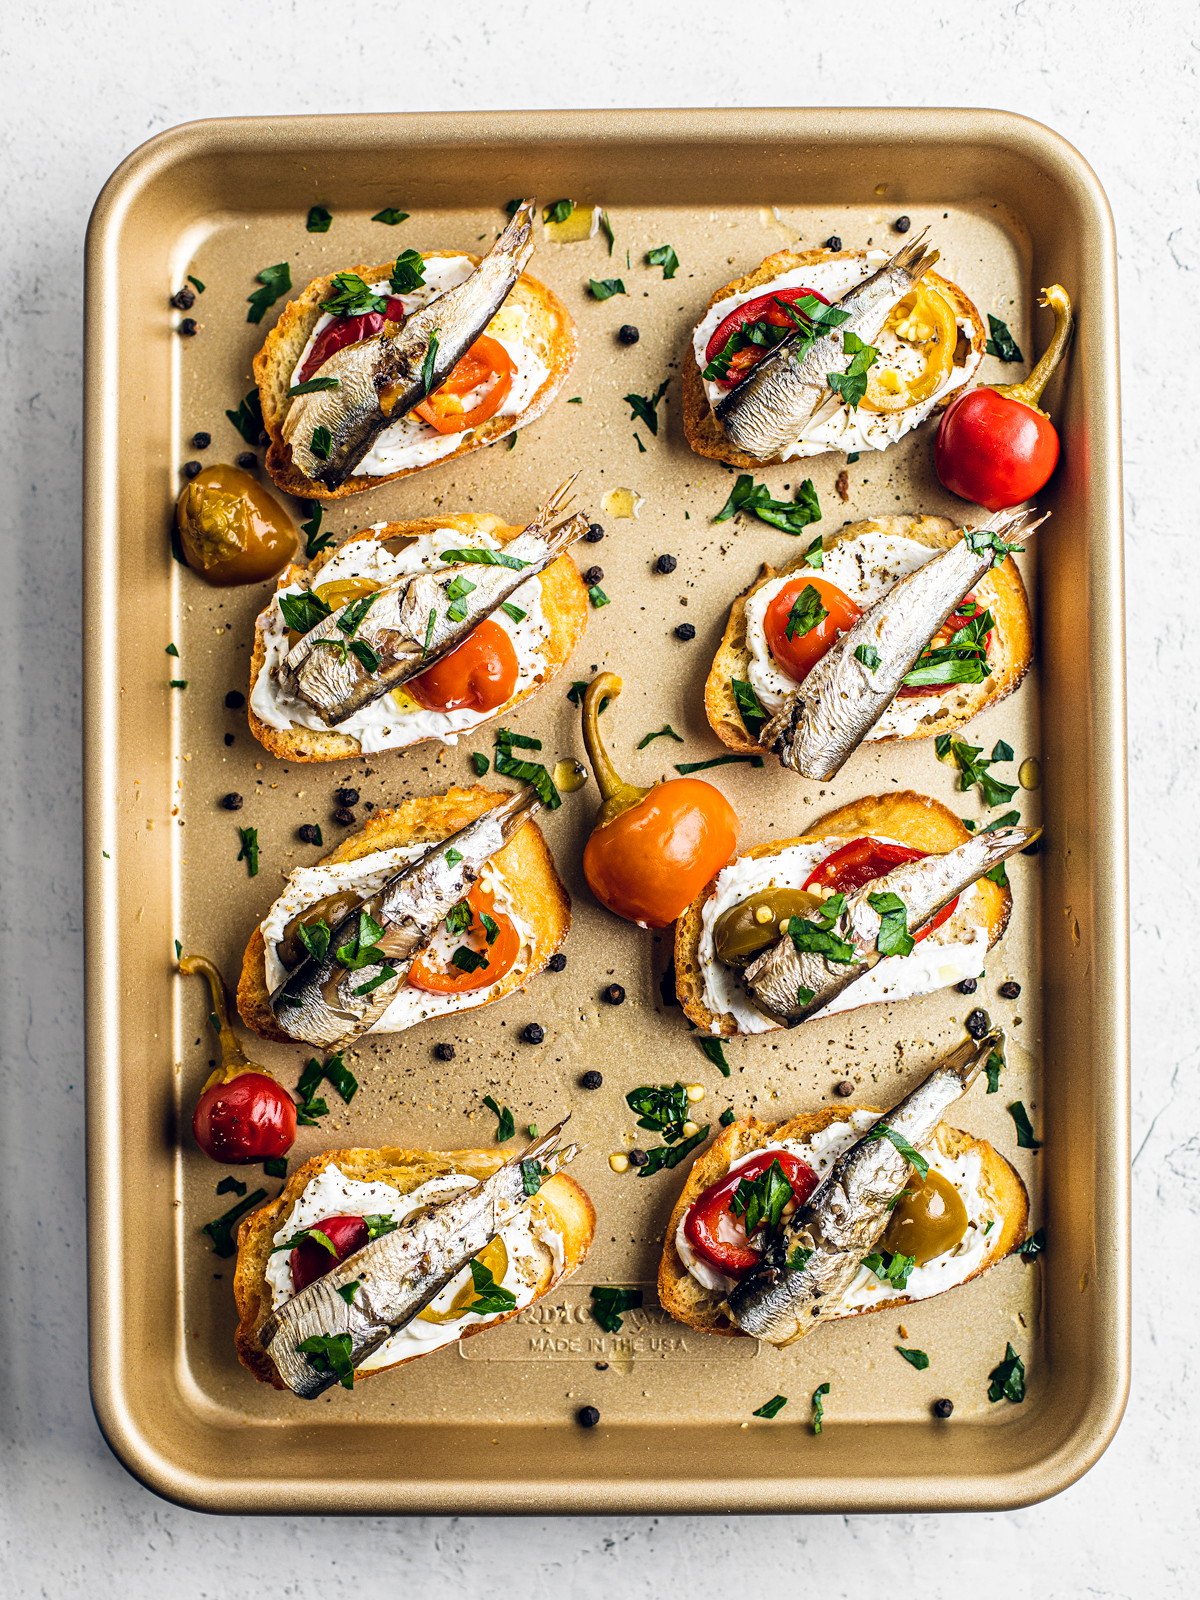 Golden sheet pan with crostini on it, which are topped with goat cheese, cherry peppers, and sardines.